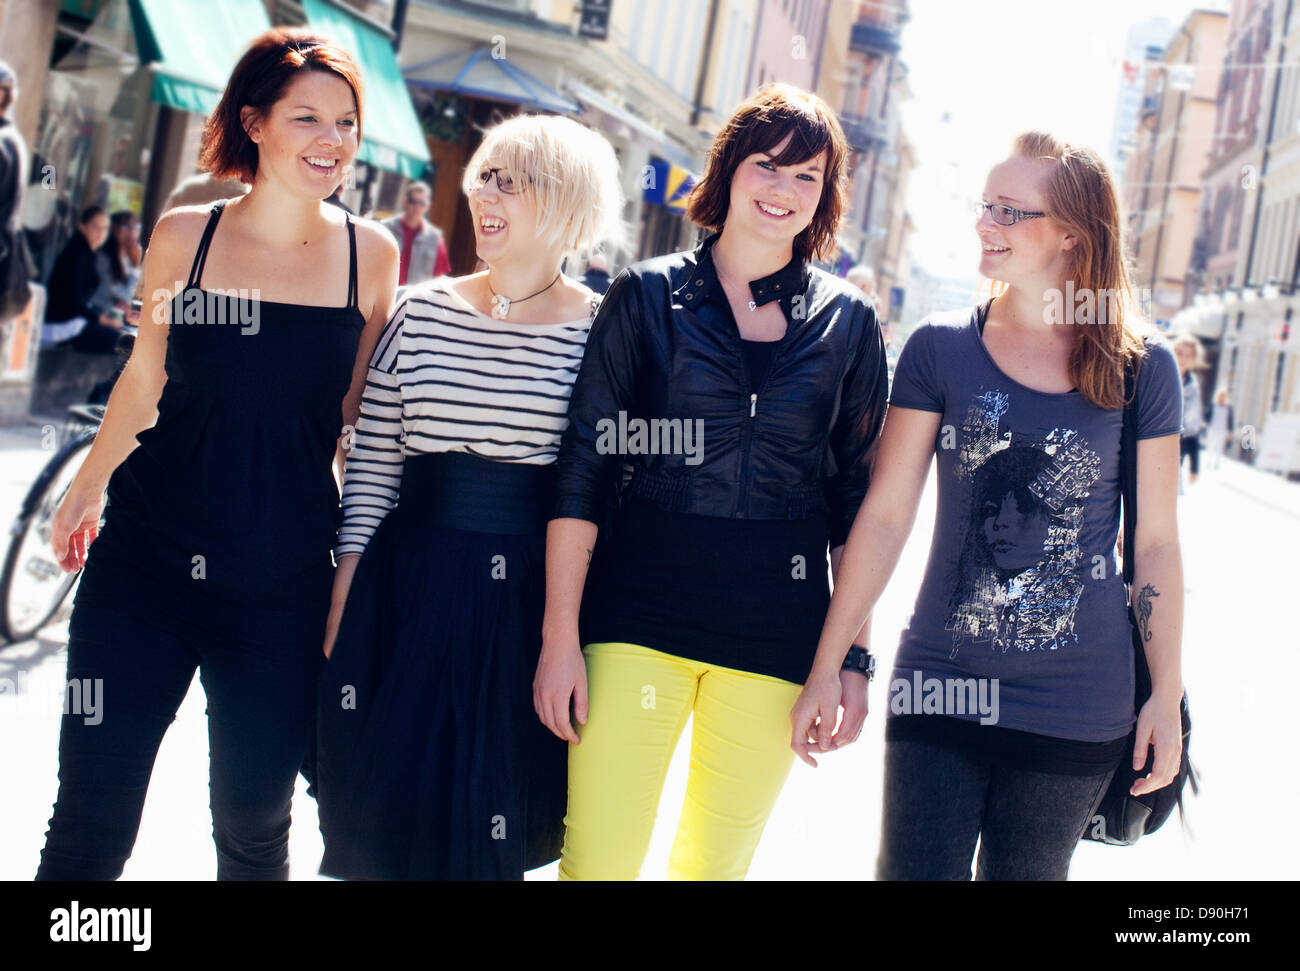 Friends roaming together Stock Photo